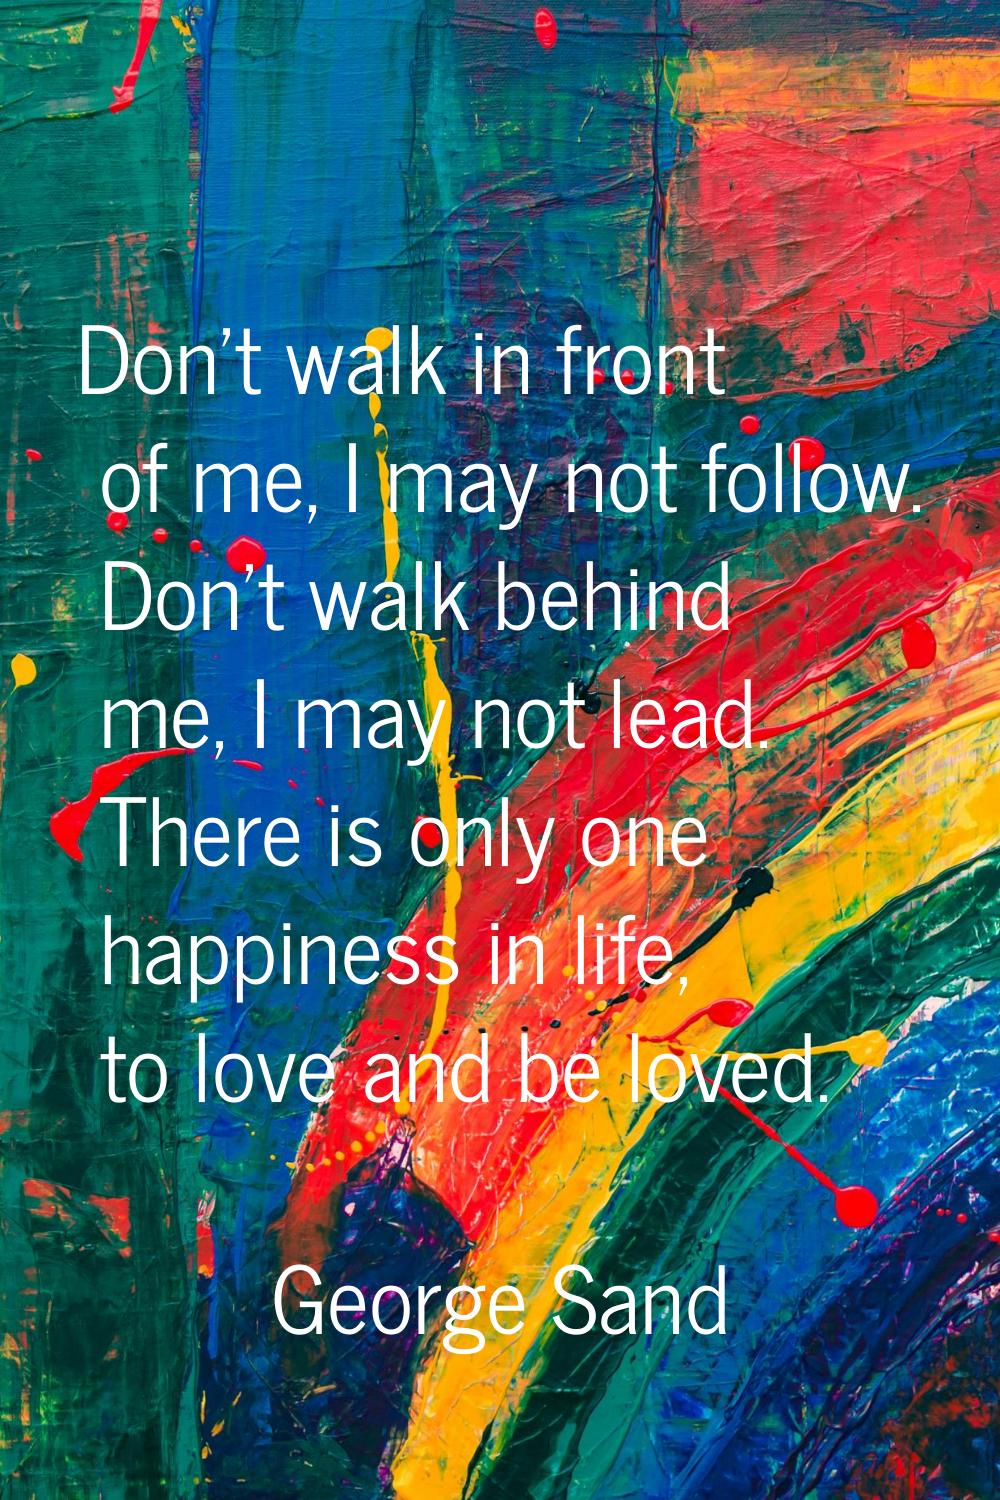 Don't walk in front of me, I may not follow. Don't walk behind me, I may not lead. There is only on